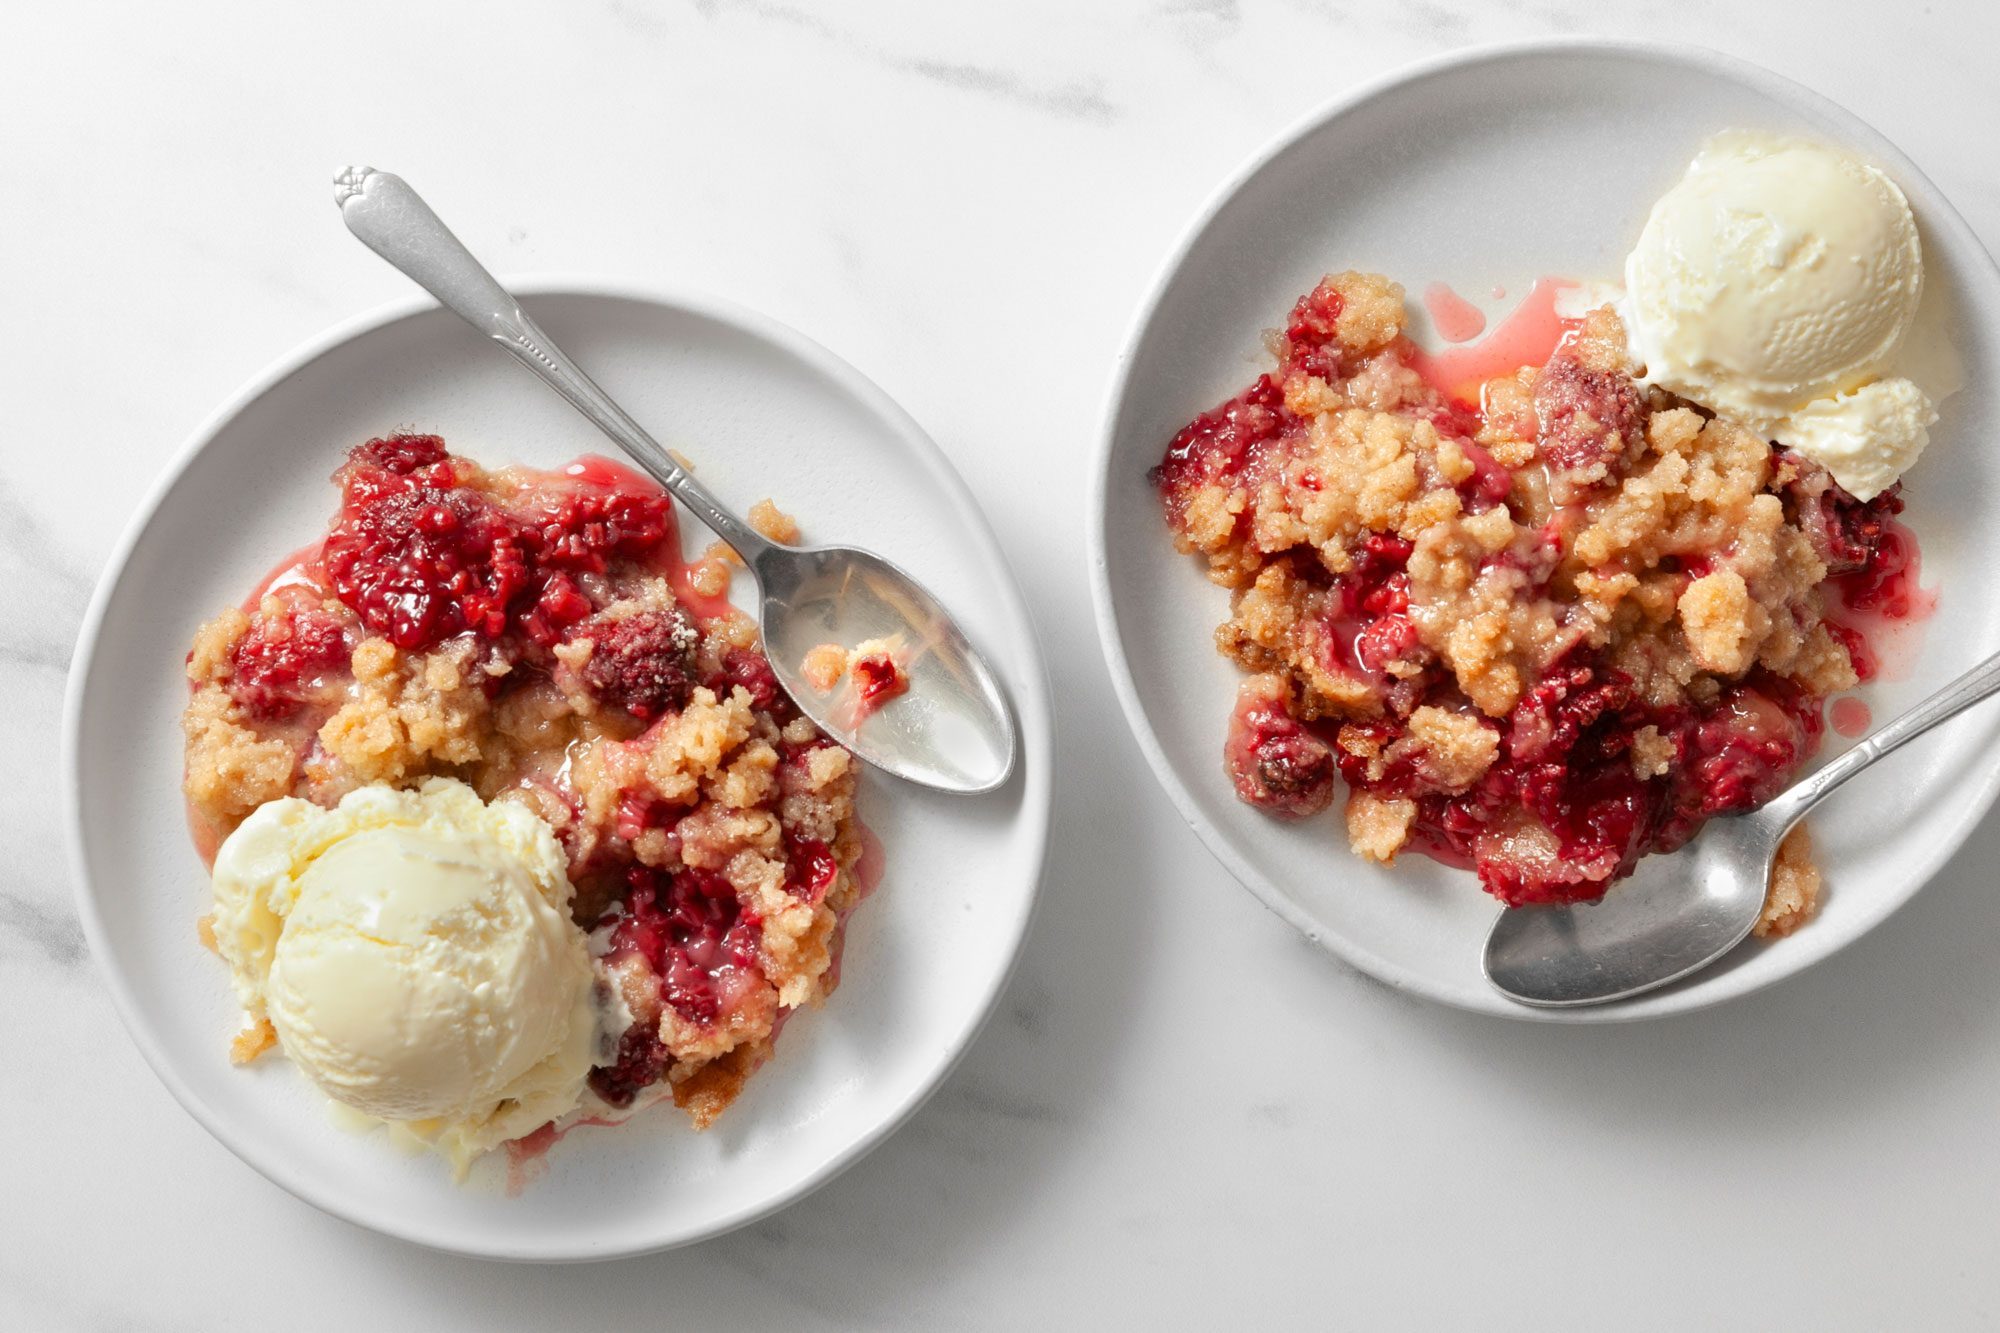 Easy Raspberry Crumble served in two small plates with ice cream scoops and silver spoons